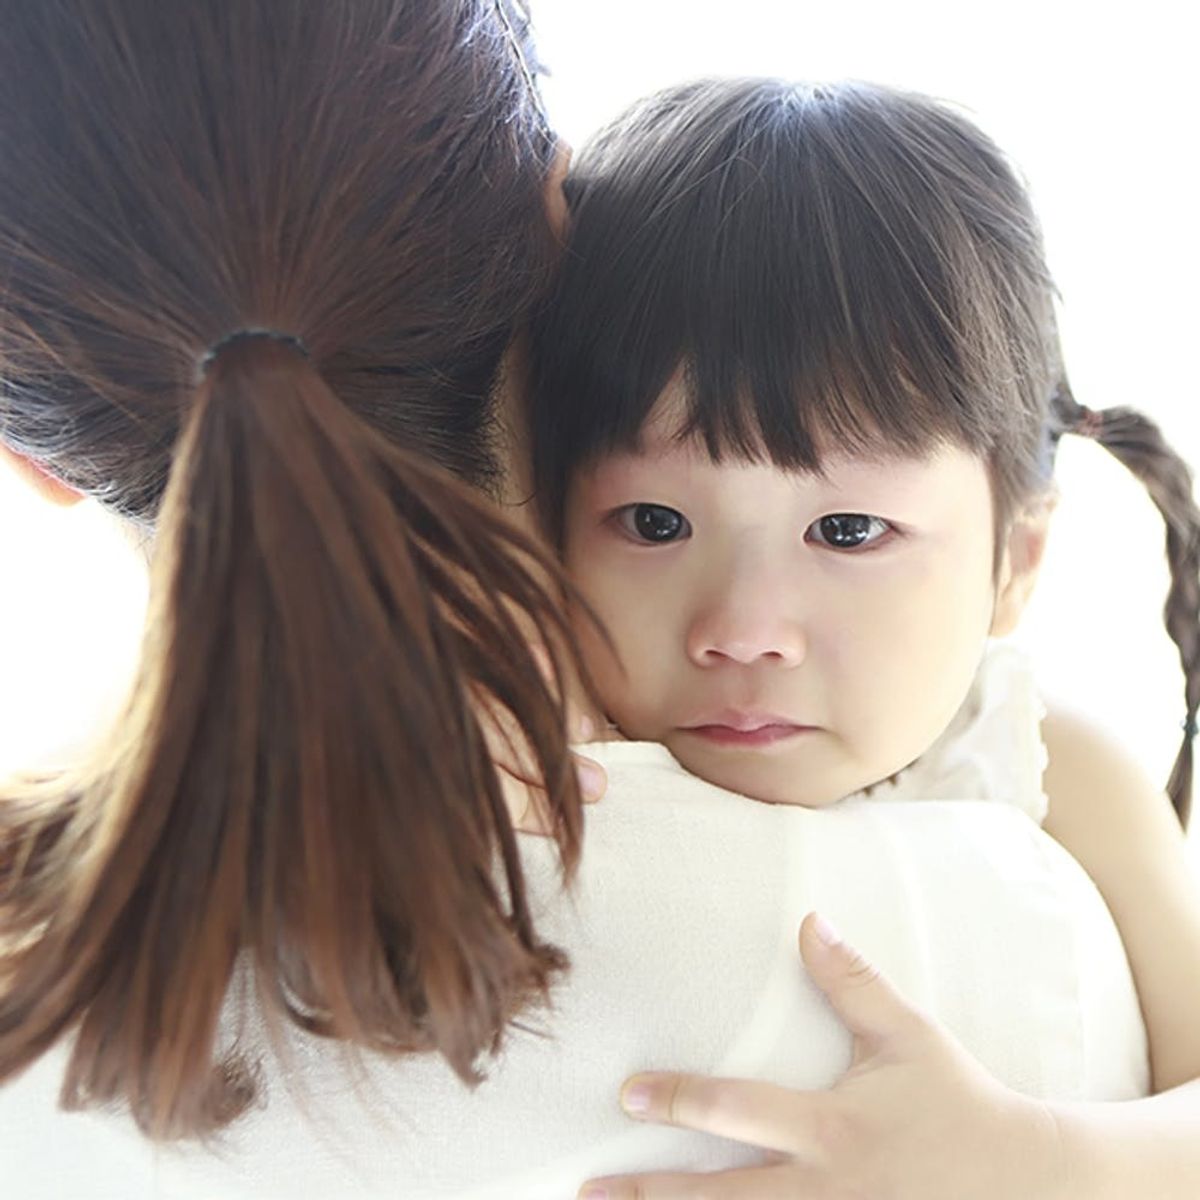 8 Helpful Ways to Teach Your Toddler About Emotions